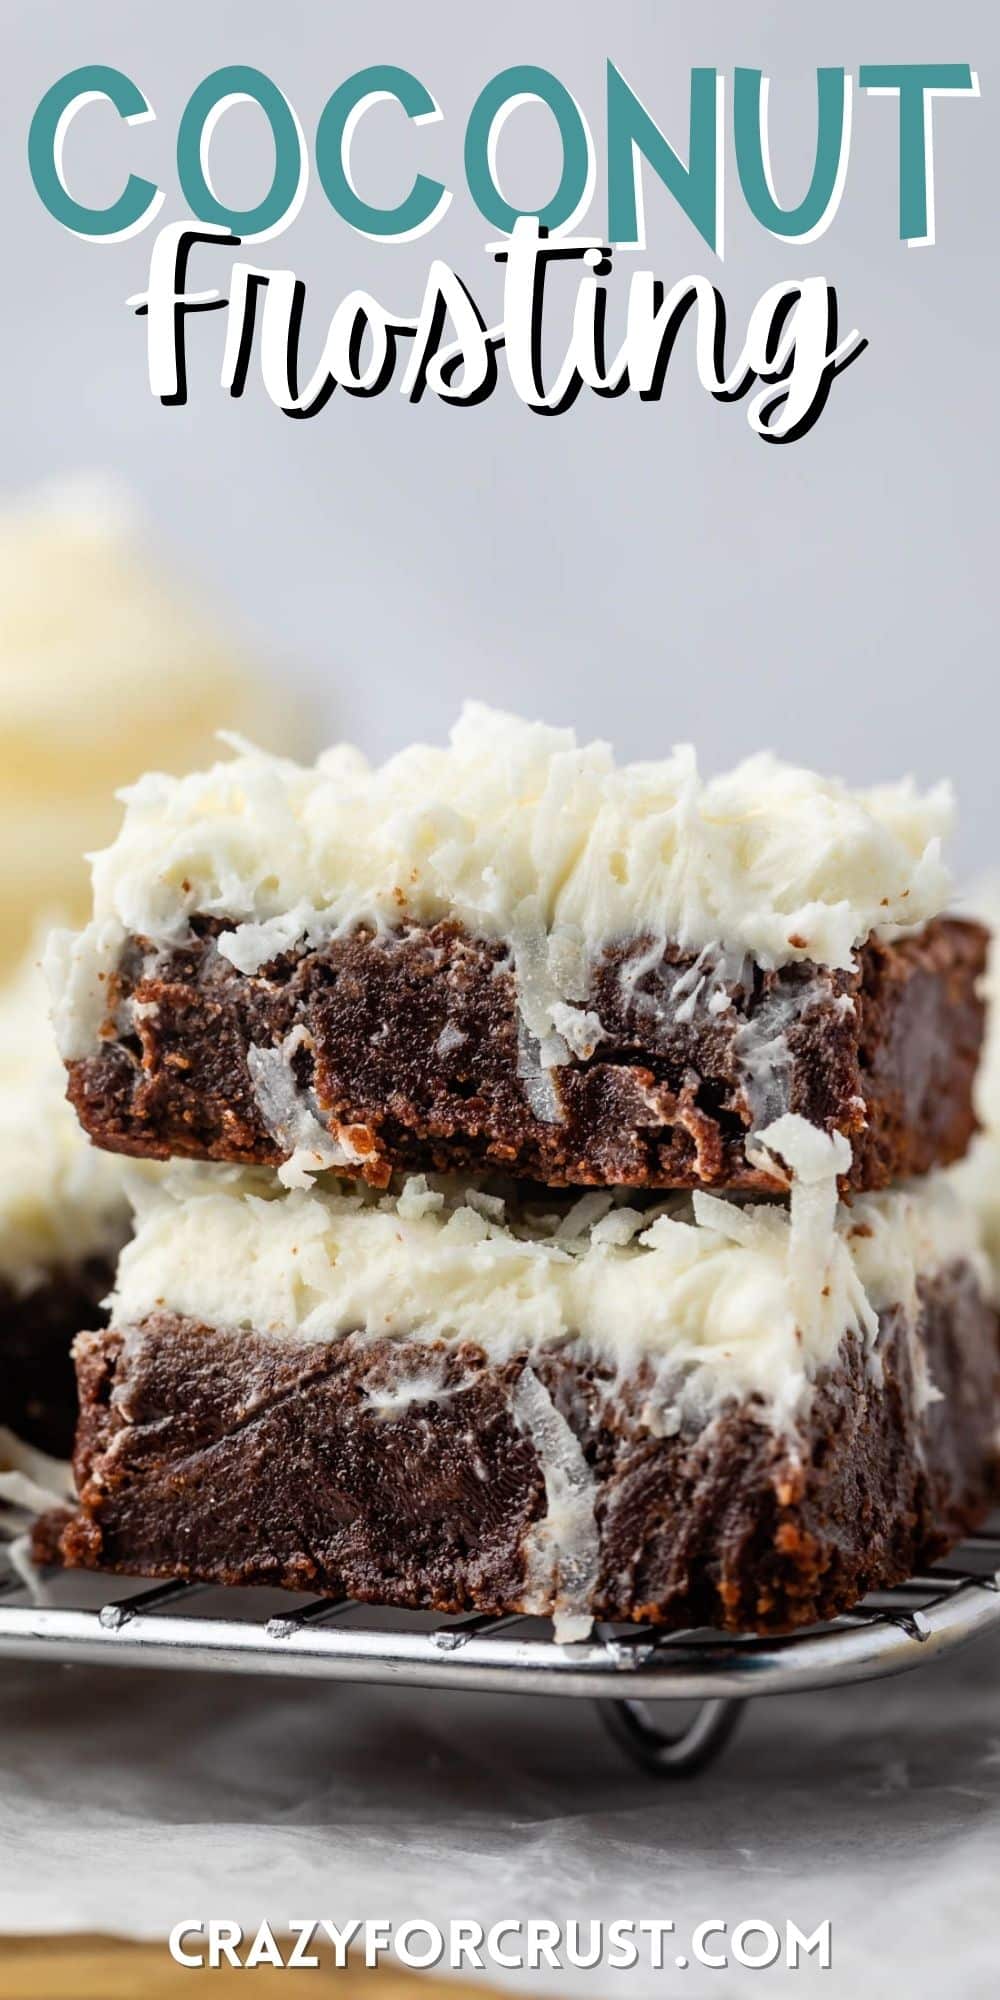 stacked brownies with white frosting mixed with coconuts with words on the image.